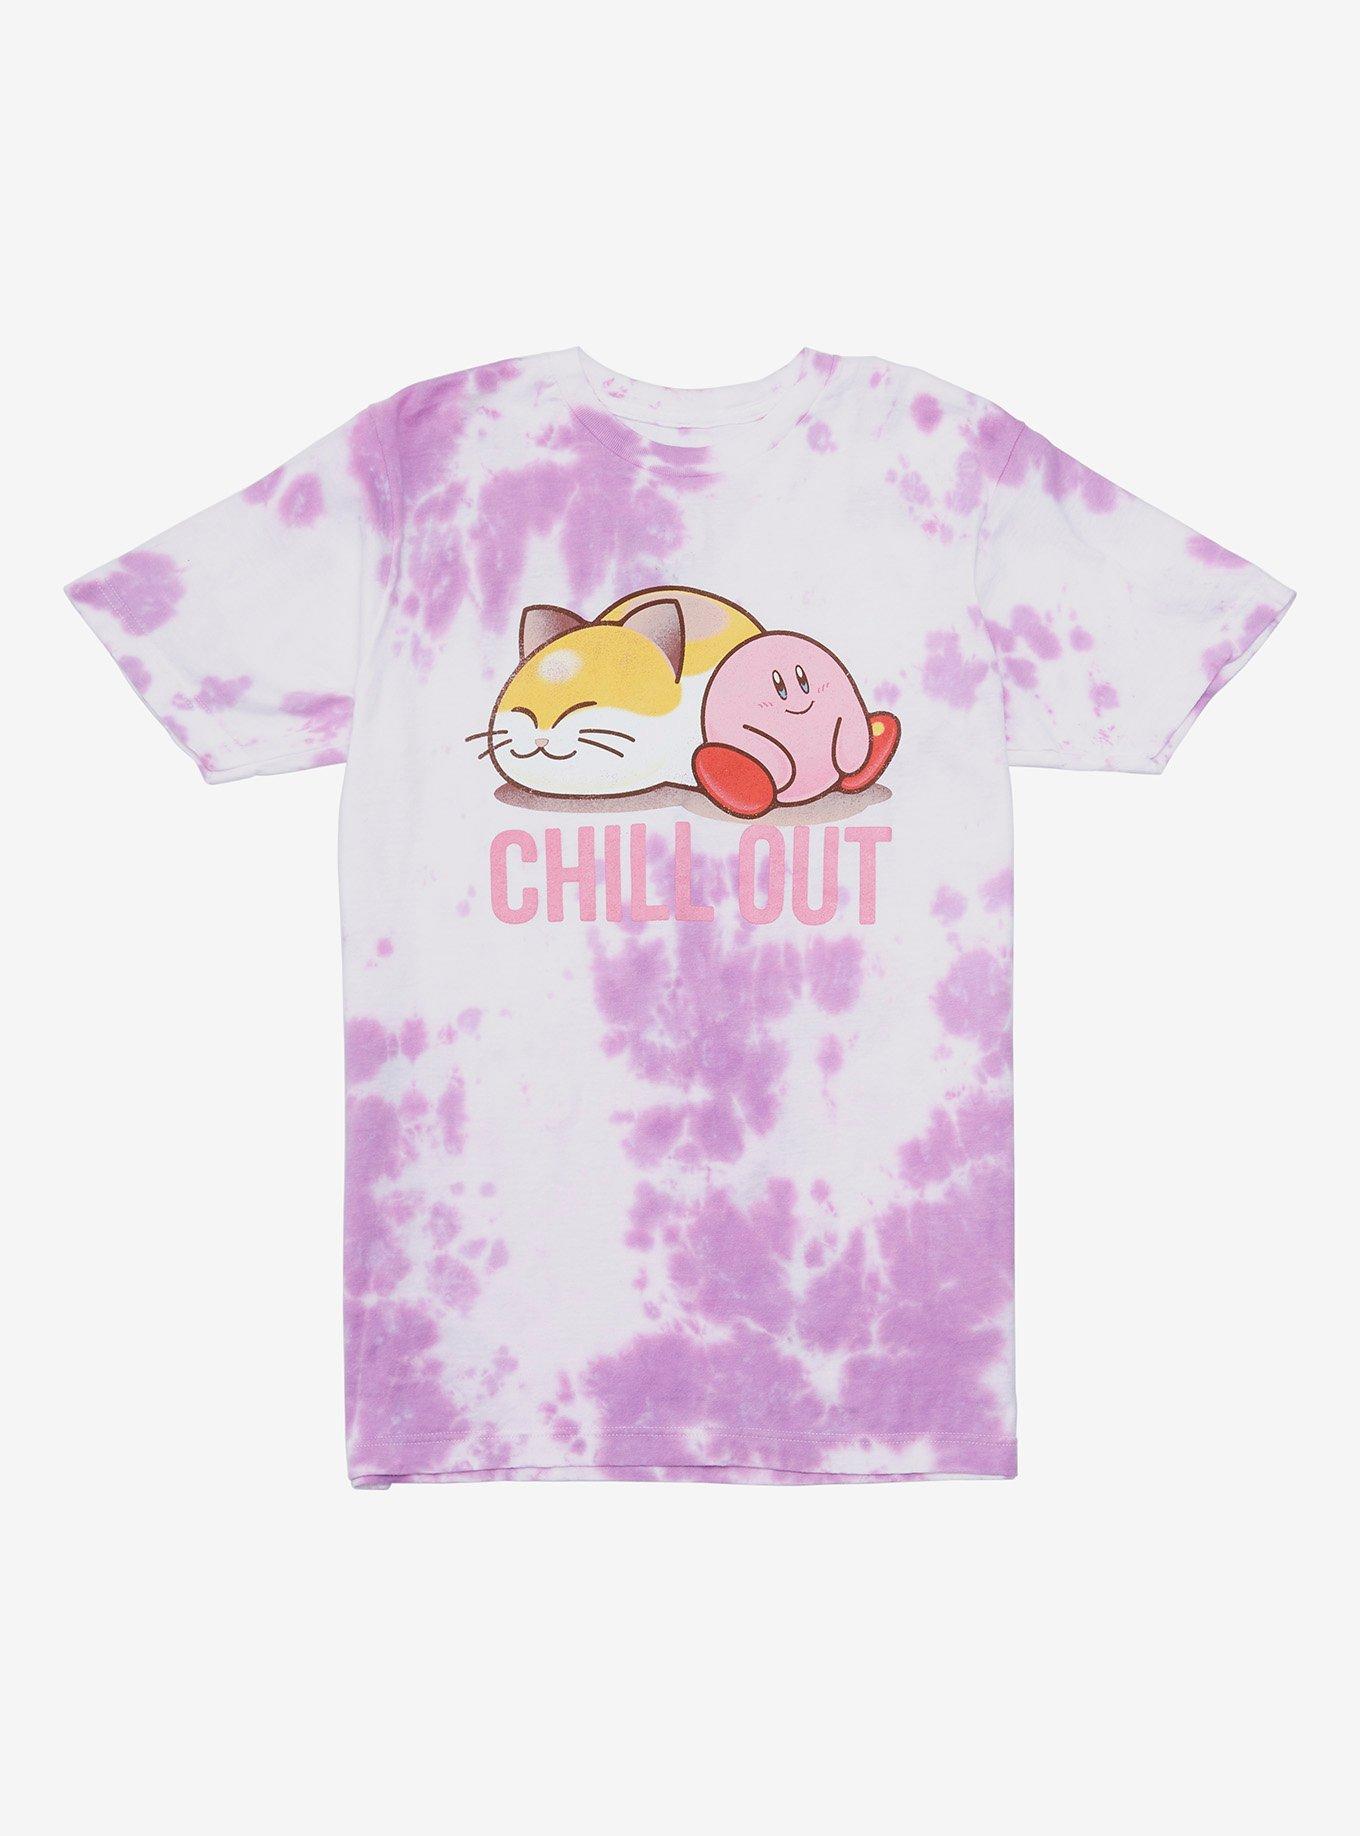 Kirby Chill Out Tie-Dye T-Shirt, TIE DYE, hi-res